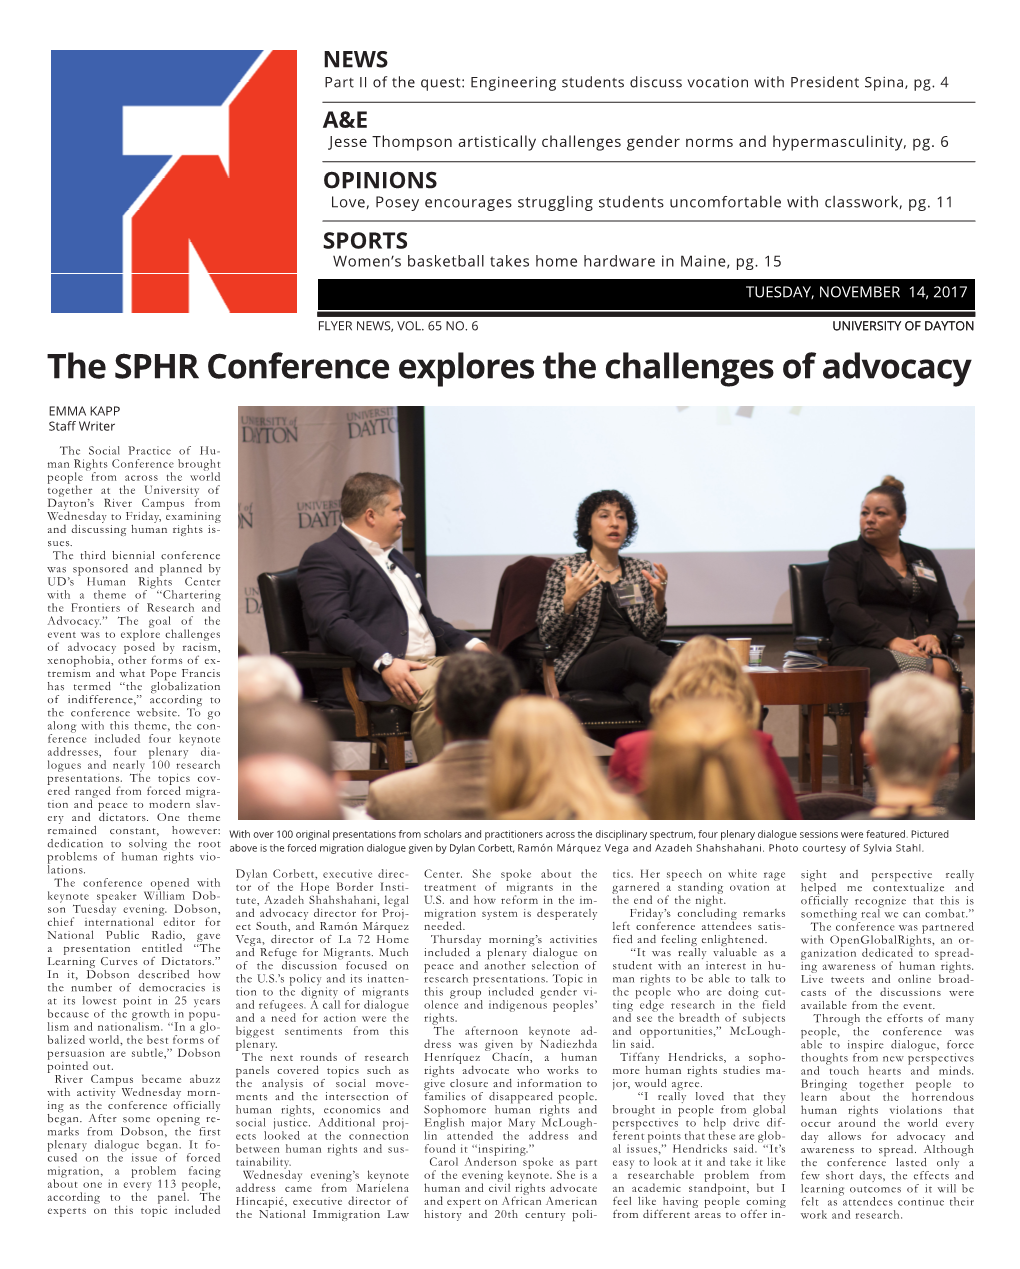 The SPHR Conference Explores the Challenges of Advocacy